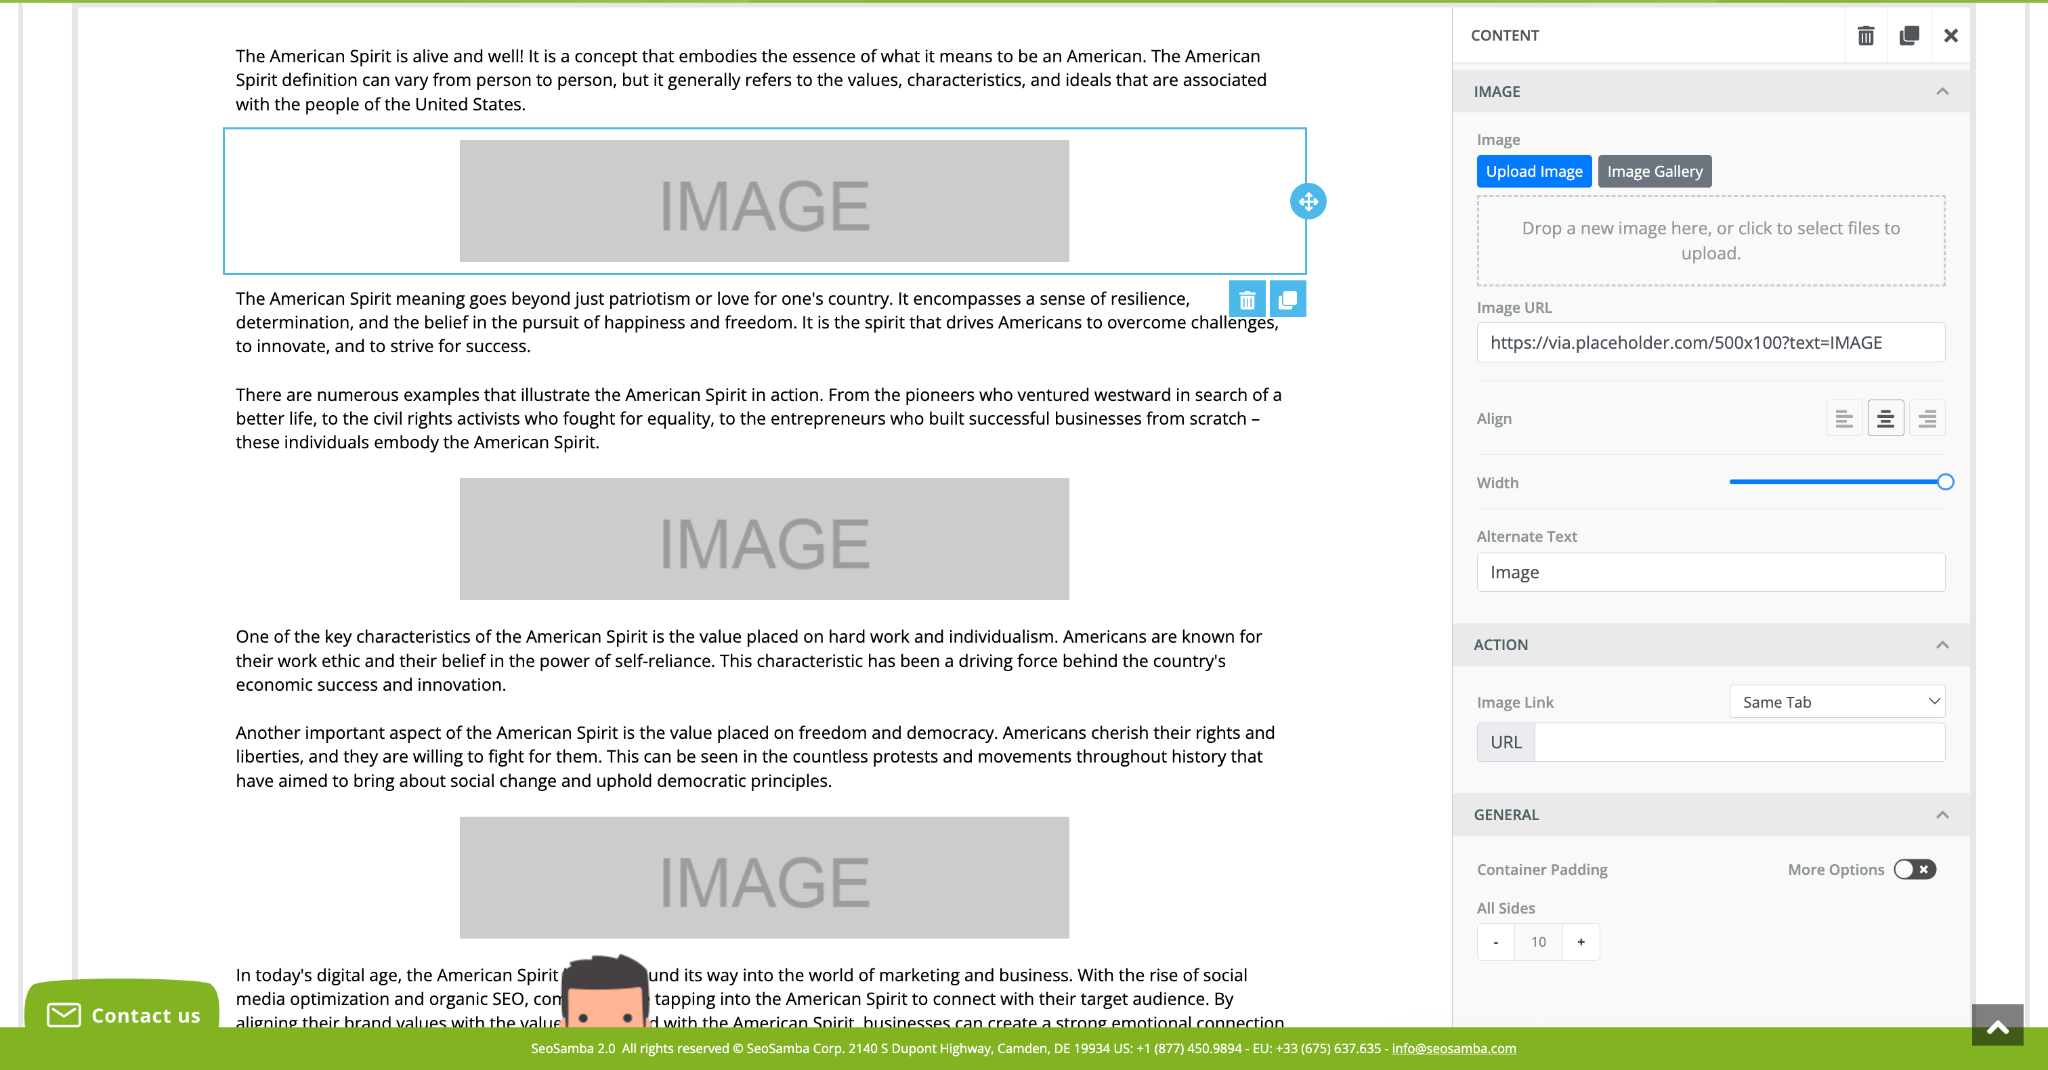 add images to your blog post